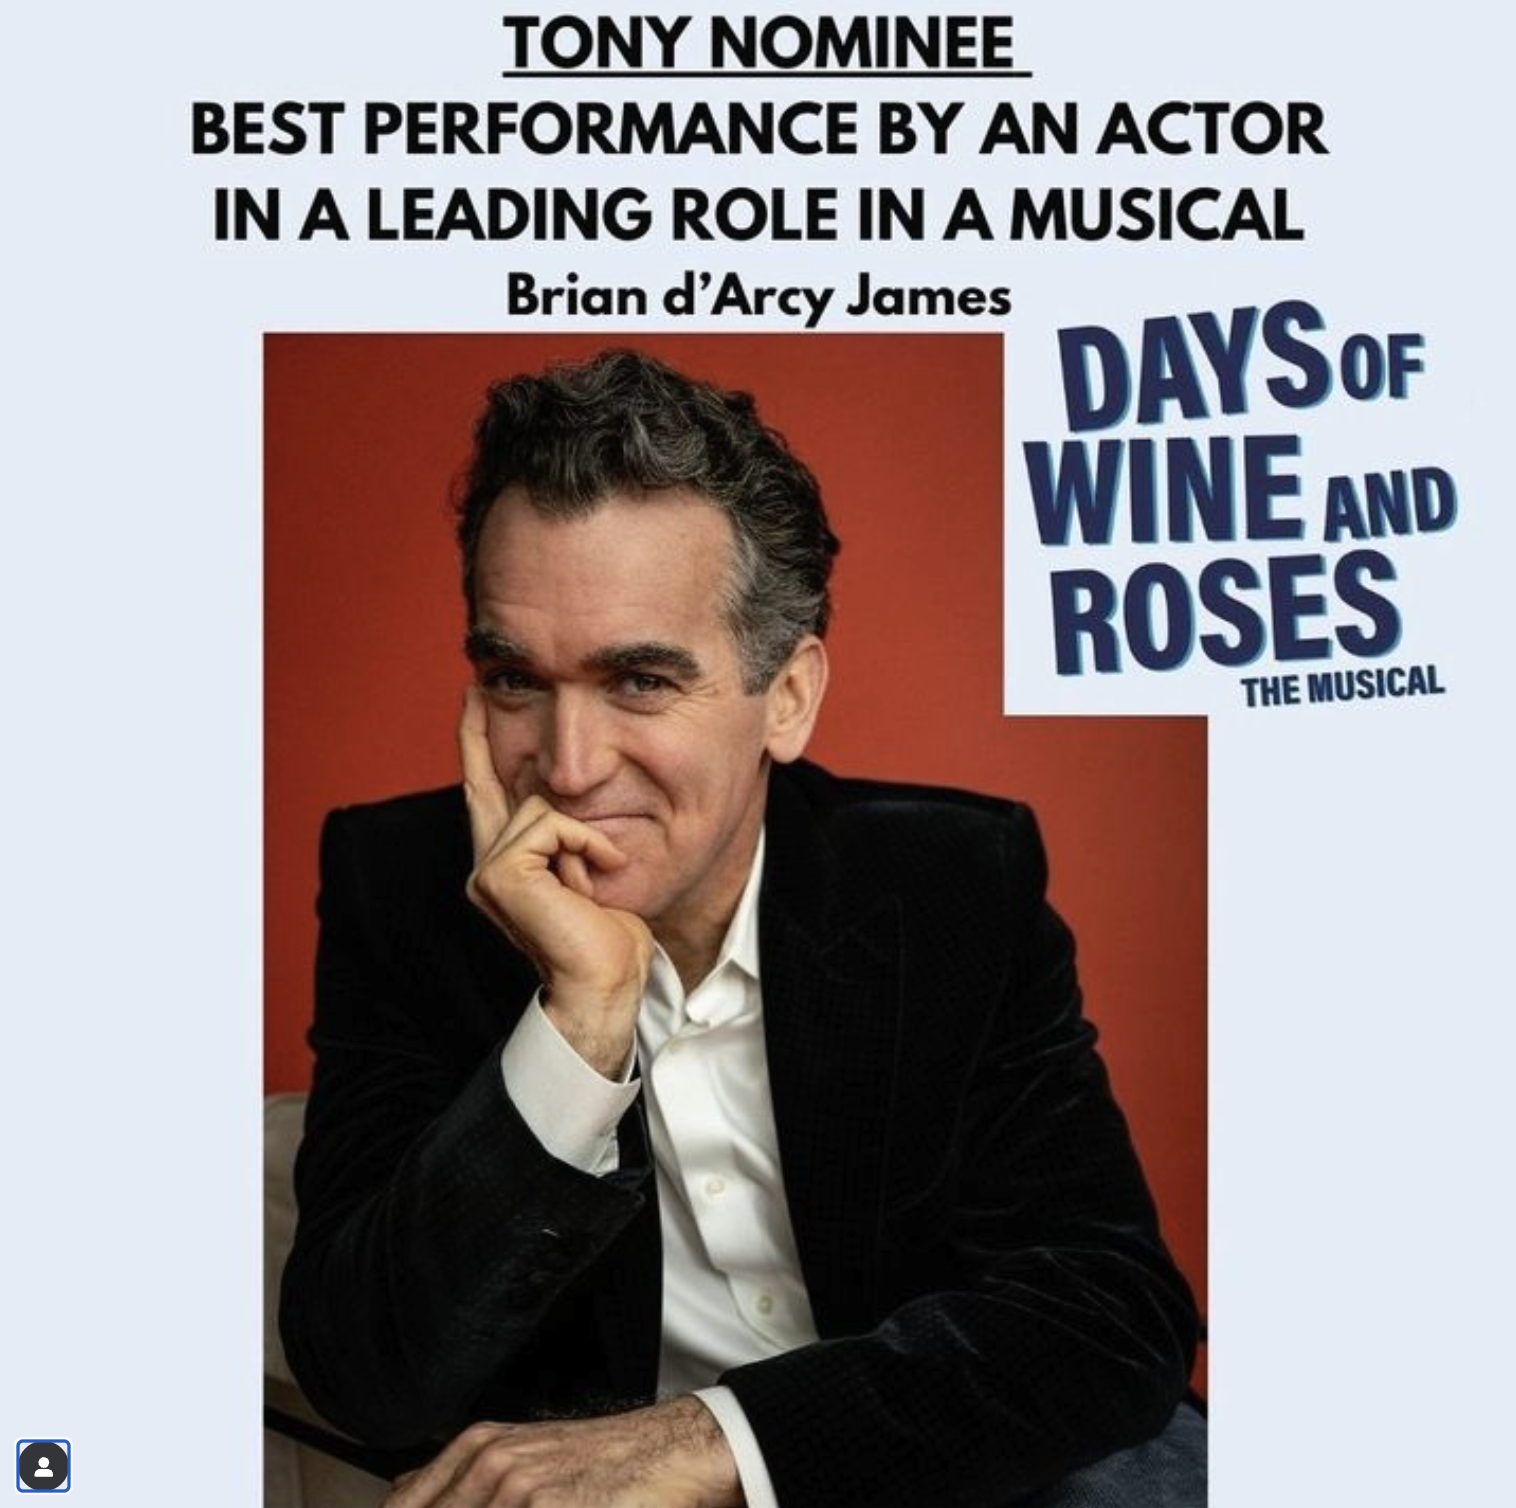 Nominations for DAYS OF WINE AND ROSES